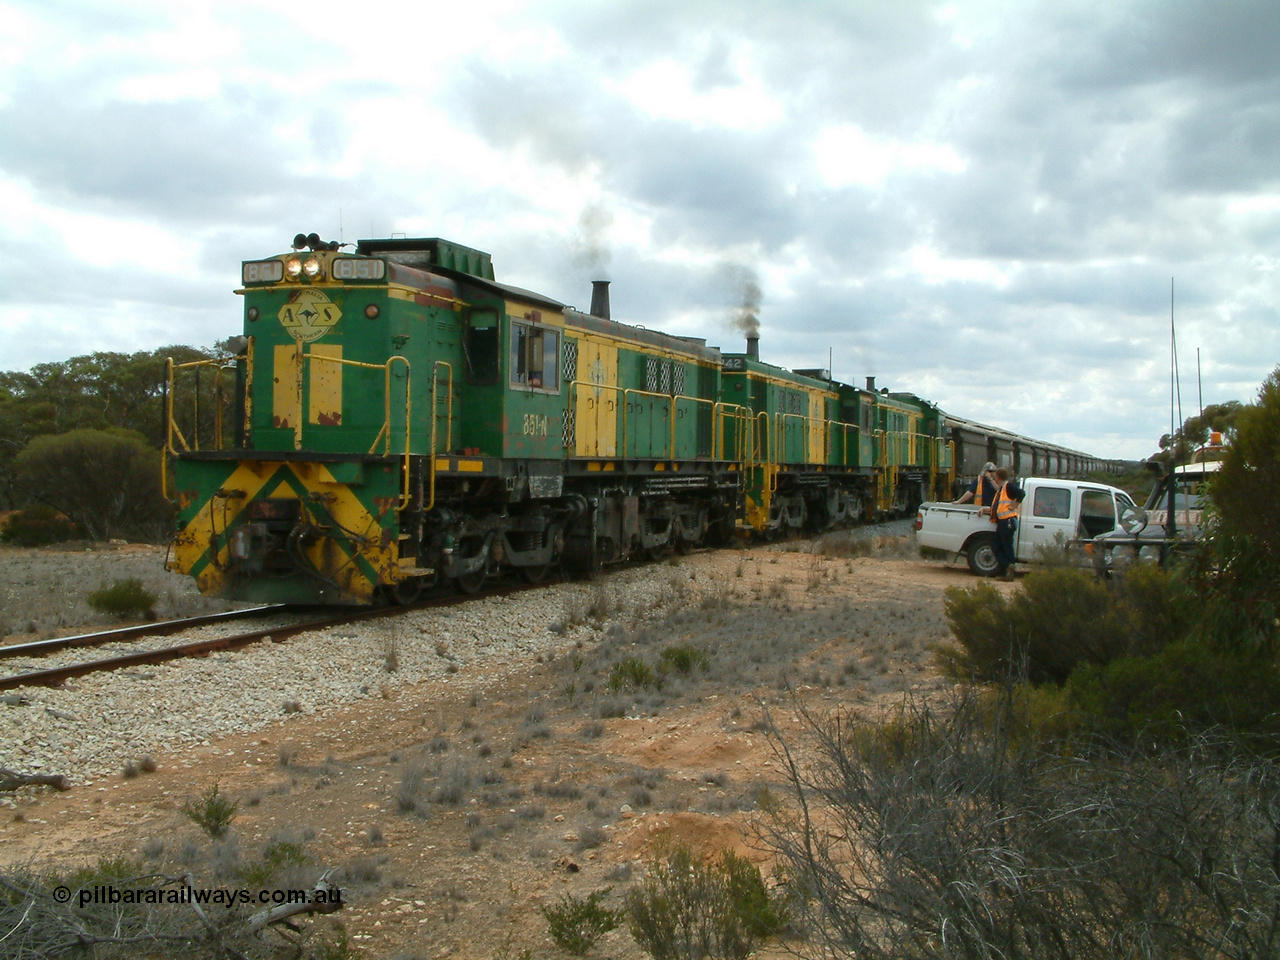 030409 121202
Kielpa, a few kilometres south of the former Konanda siding loaded grain train with 830 class unit 851 AE Goodwin ALCo model DL531 serial 84137, 851 has spent its entire operating career on the Eyre Peninsula, leads fellow 830 class 842 serial 84140 and a rebuilt unit DA 4, rebuilt from 830 class unit 839 by Port Augusta Workshops, retains original serial 83730 and model DL531 with the first twelve waggons behind the locos XNW type powers away from a crew change.
Keywords: 830-class;851;84137;AE-Goodwin;ALCo;DL531;